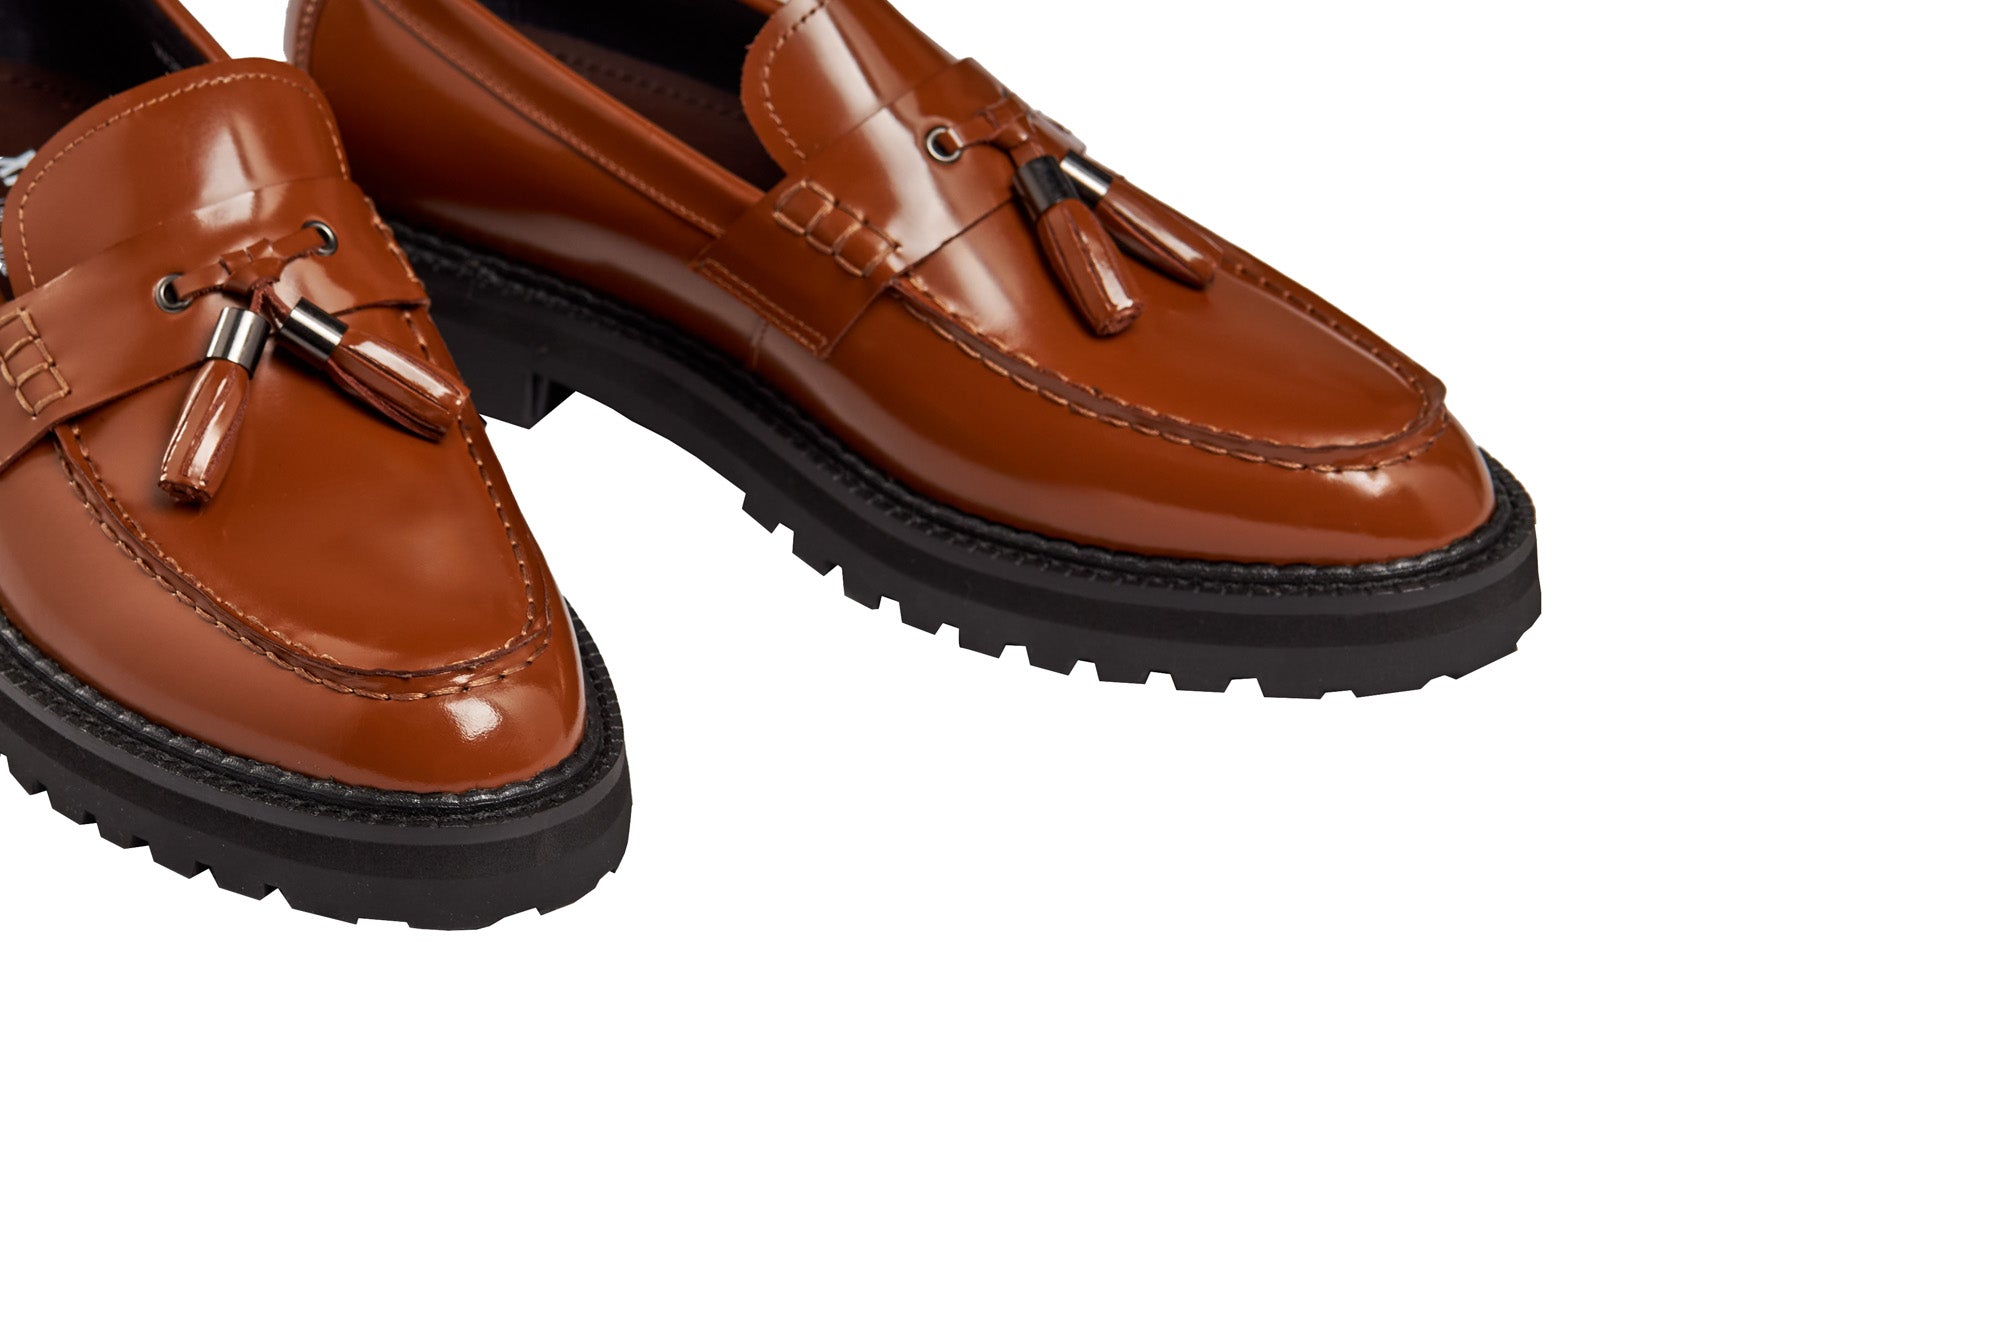 TAN PATENT LEATHER TASSEL LOAFERS